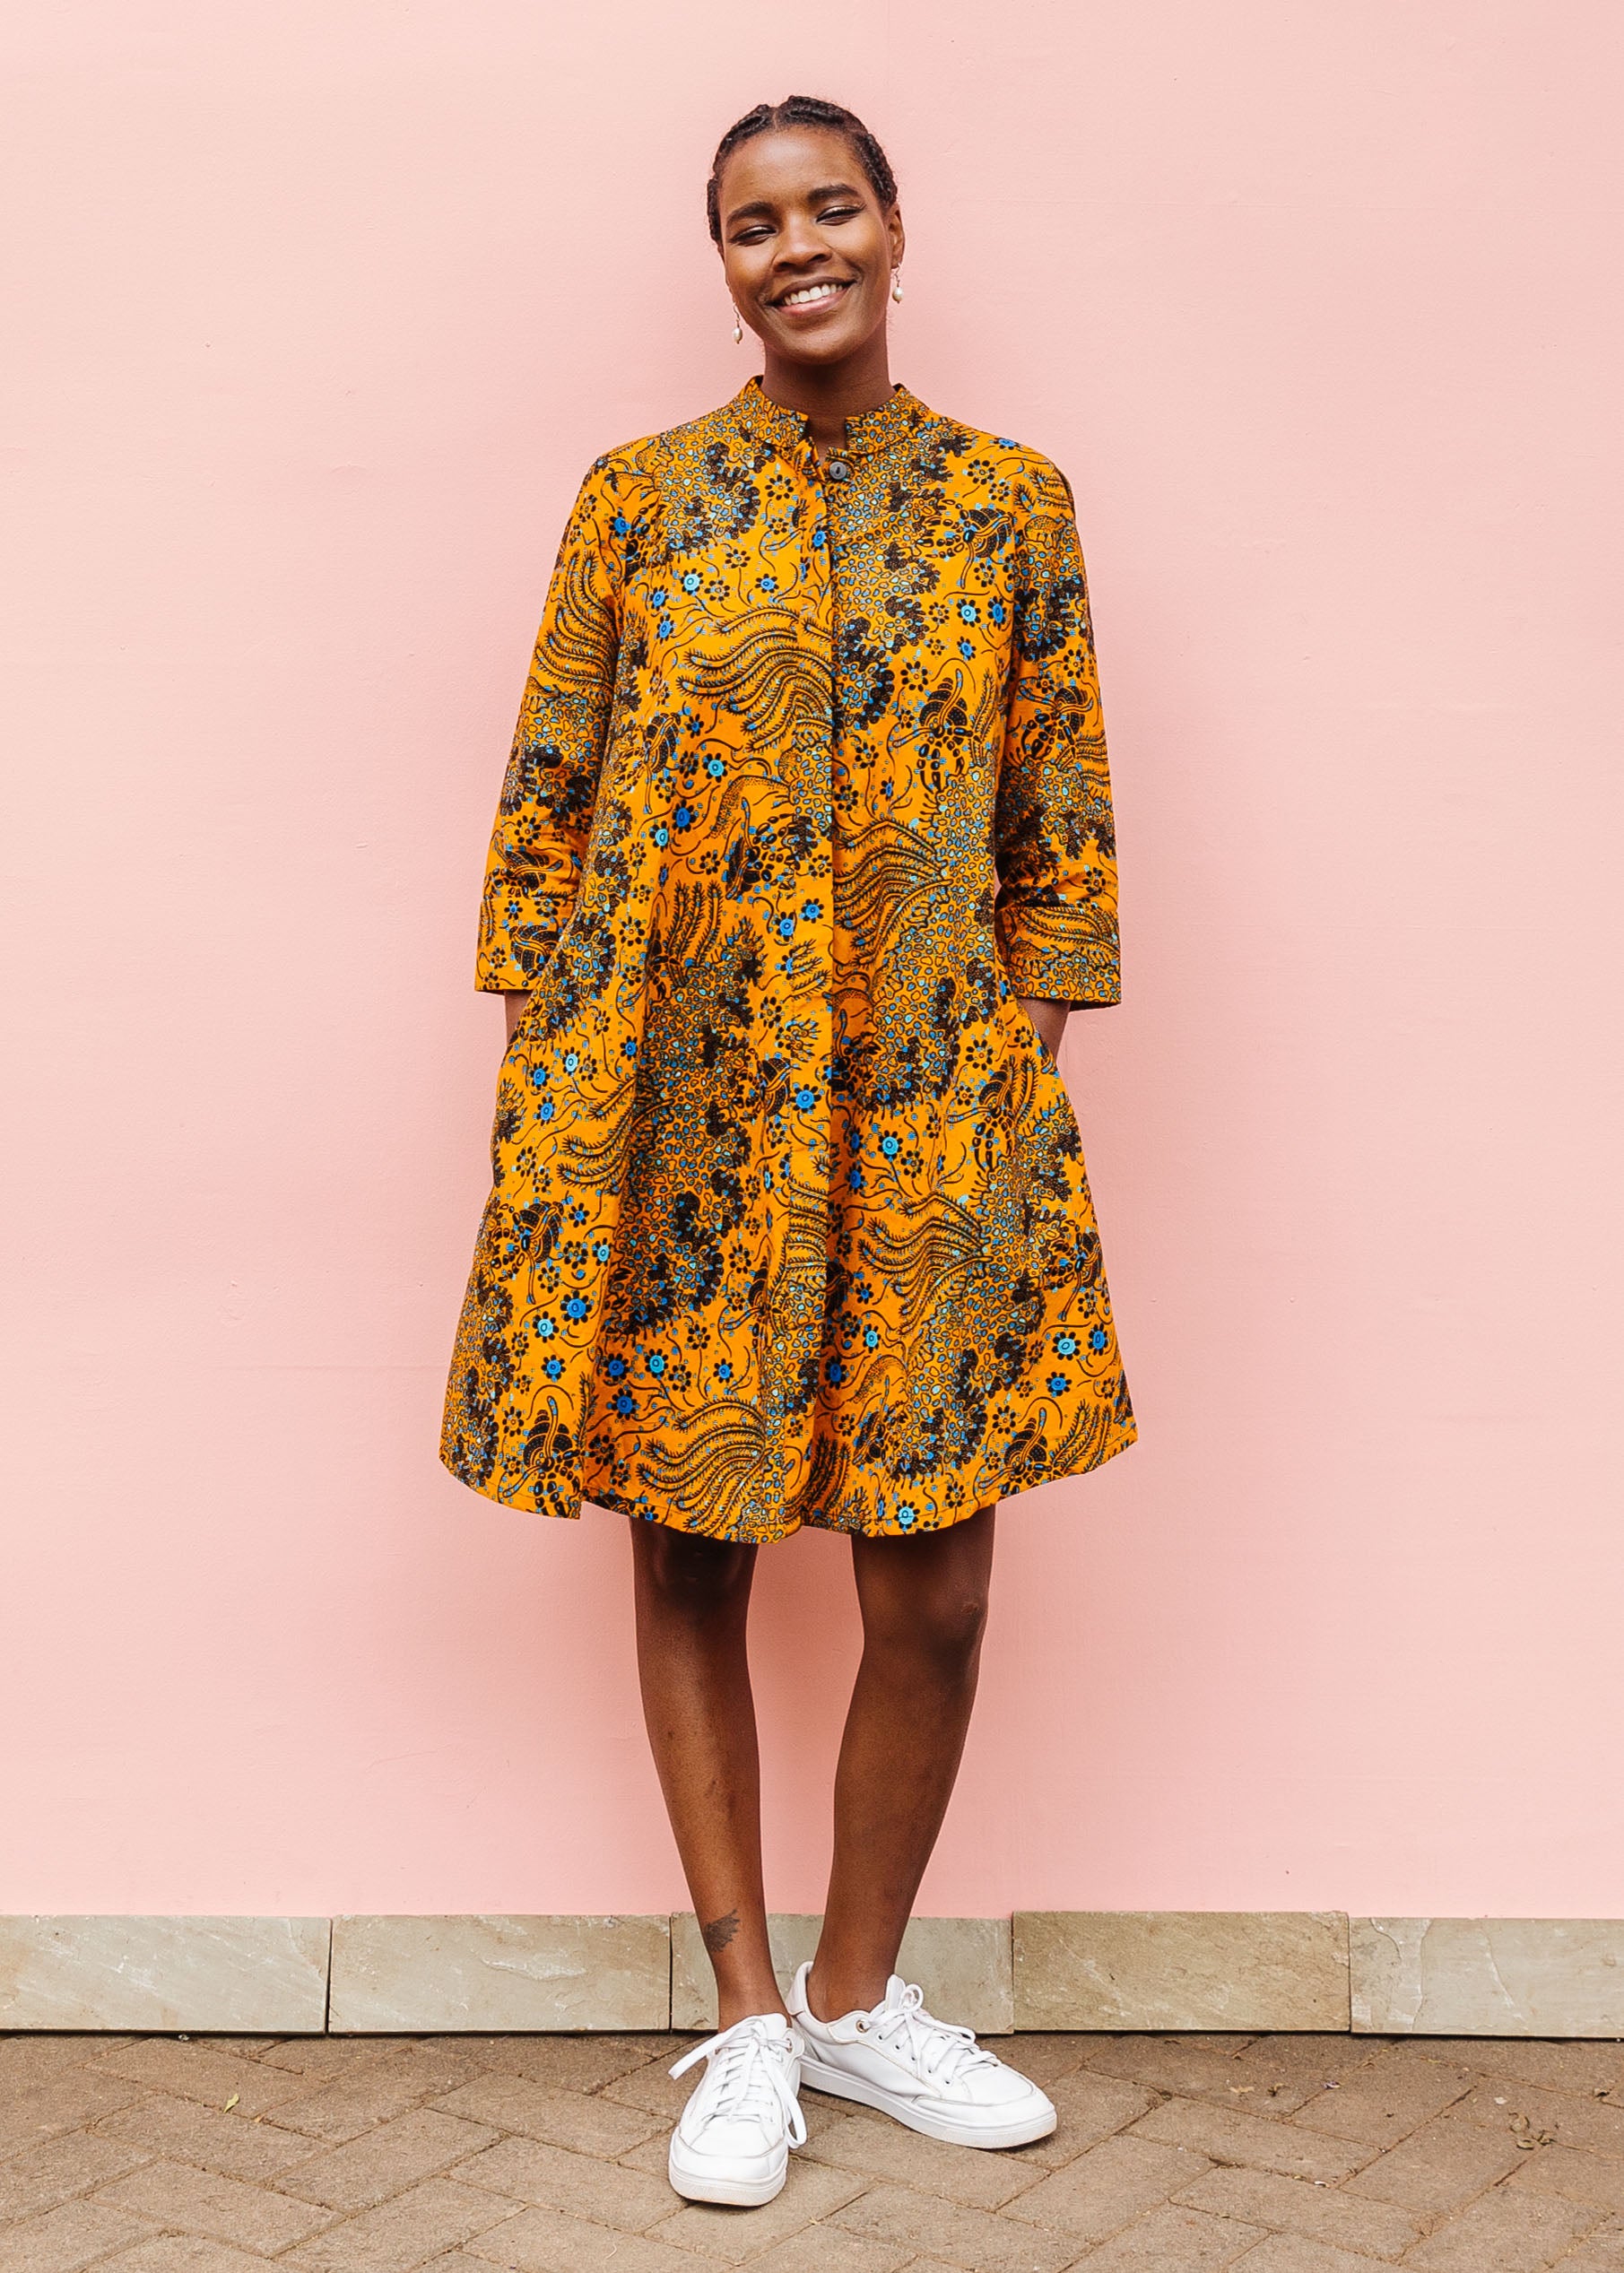 Model wearing caramel dress with blue and black small floral print.